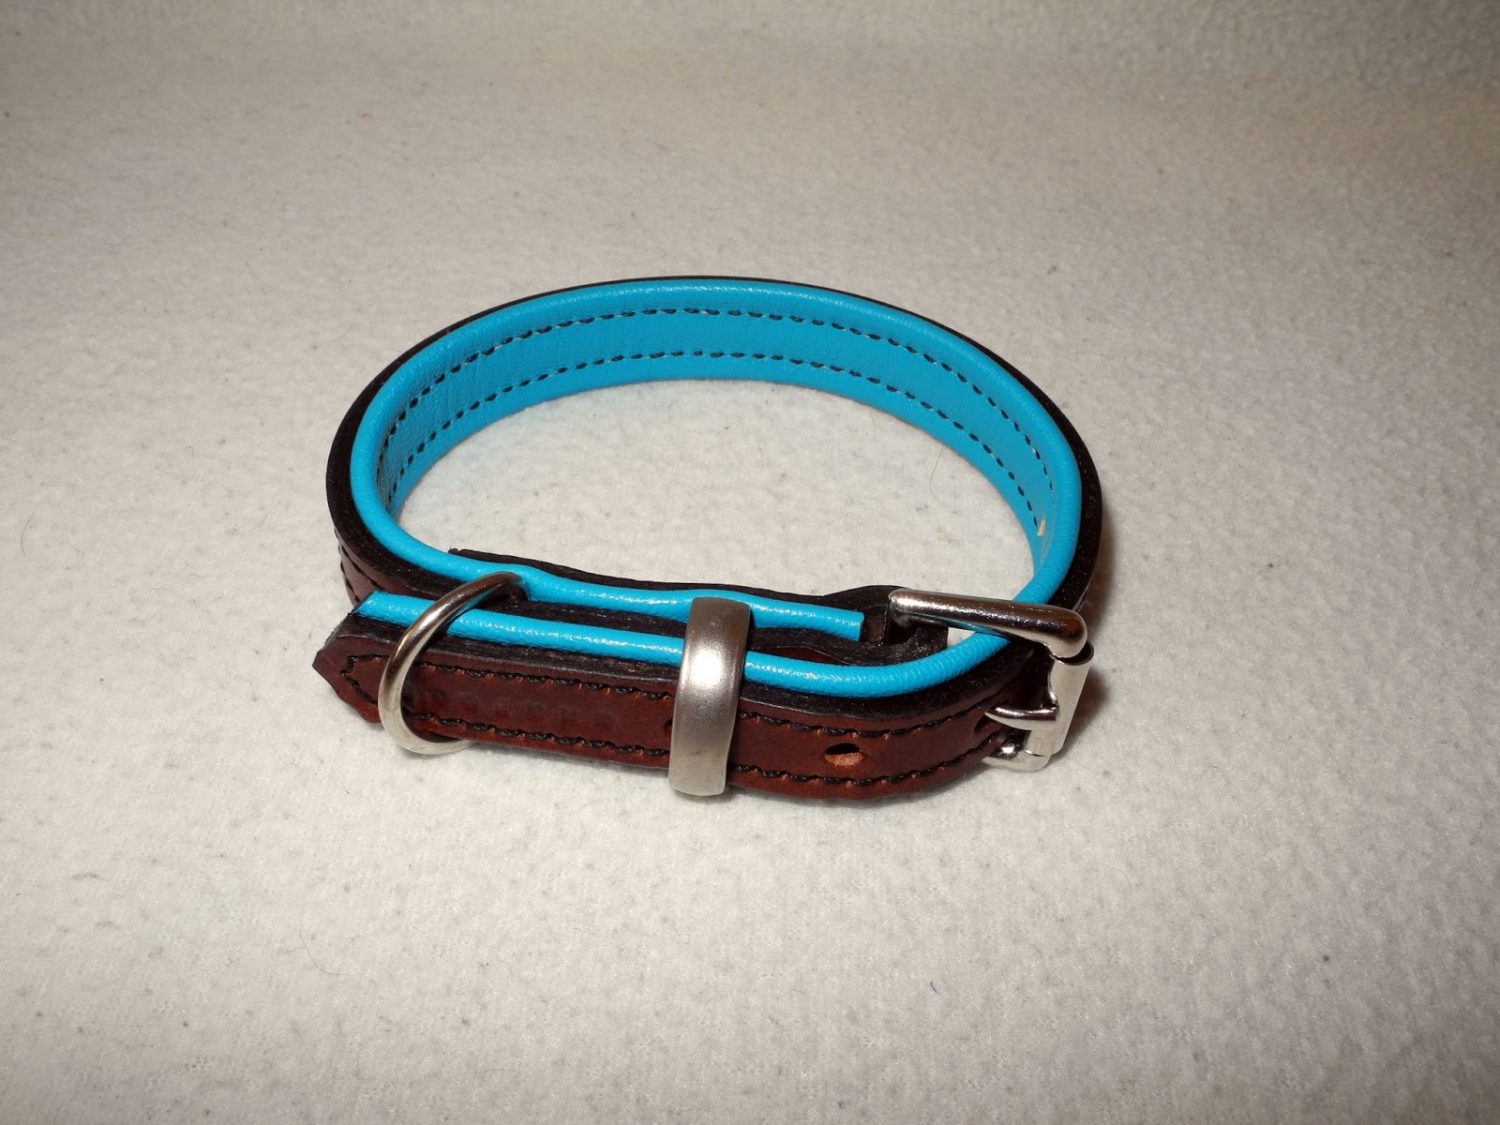 Soft Padded Leather Dog Collar - Tan on Turquoise